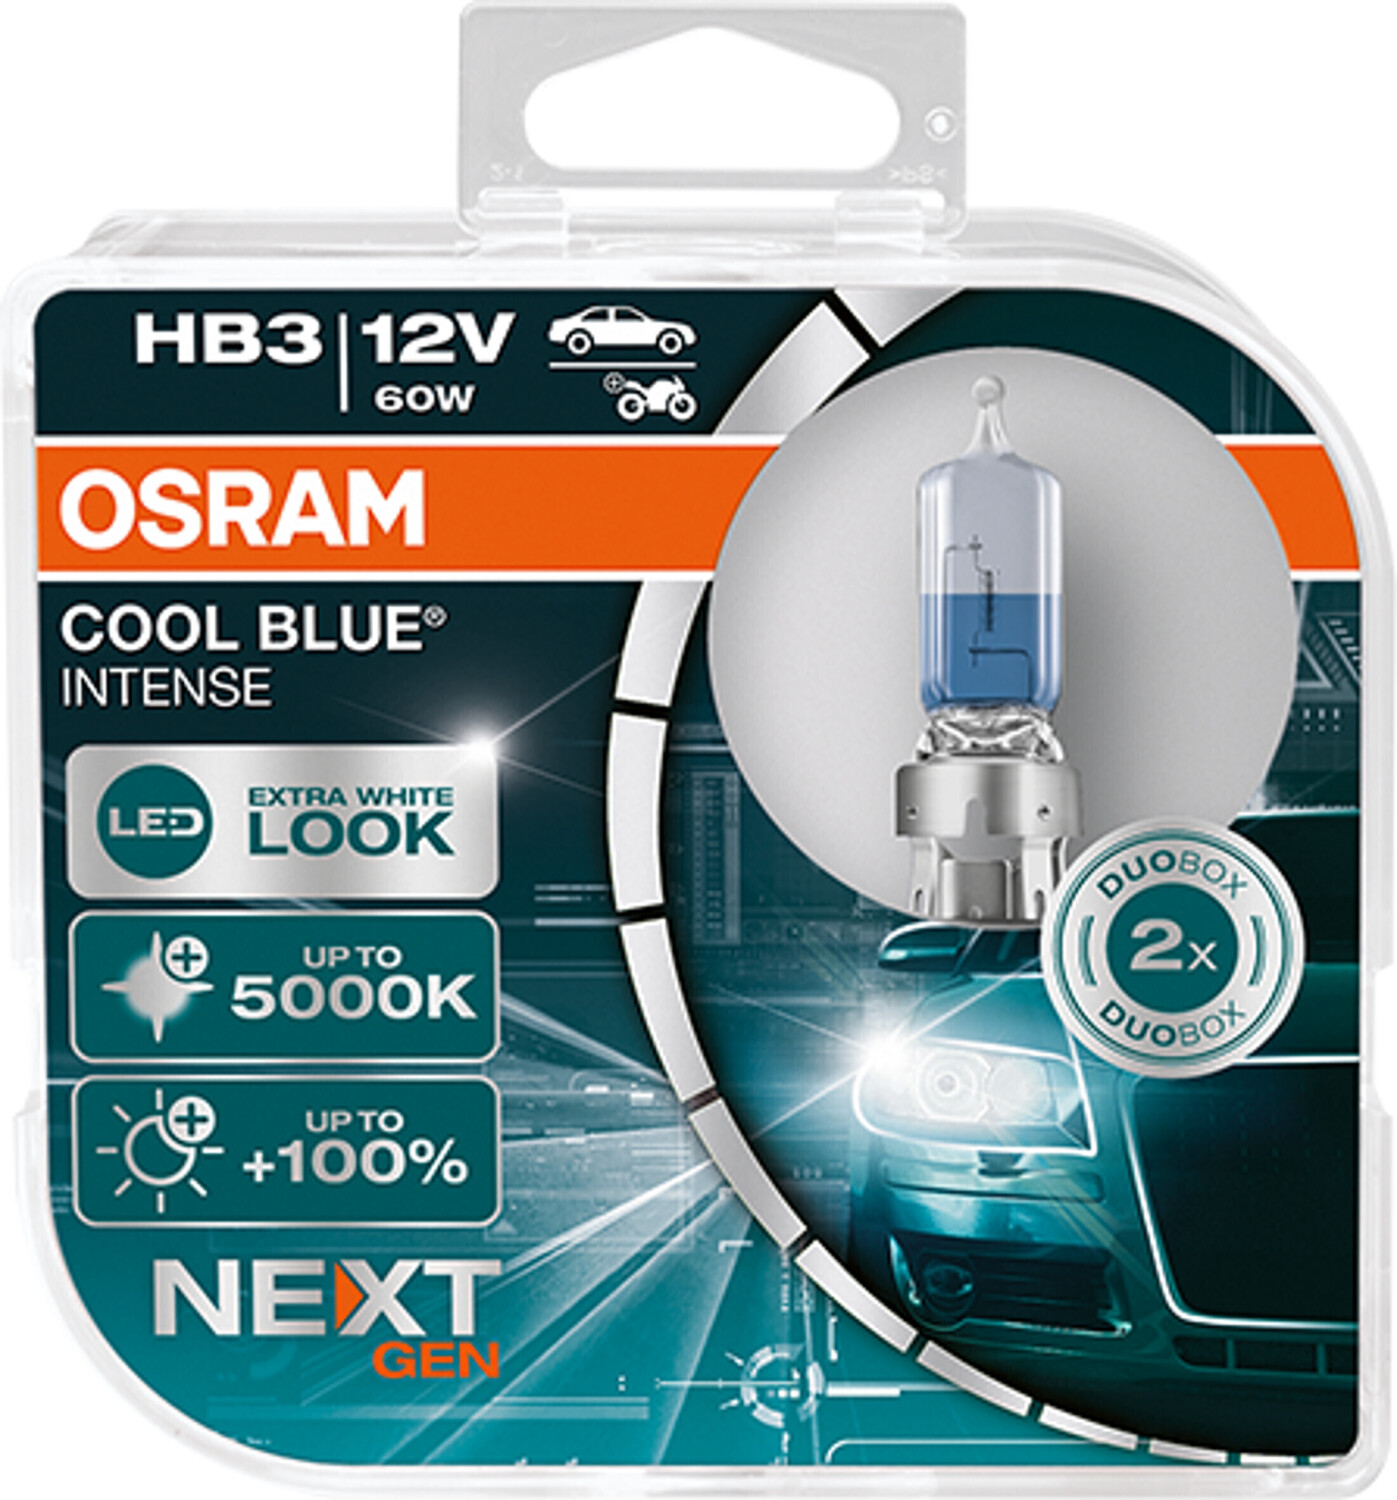 Buy Osram Cool Blue Intense (Next Gen) HB3 12V 60W Duo-Box (9005CBN-HCB)  from £16.12 (Today) – Best Deals on